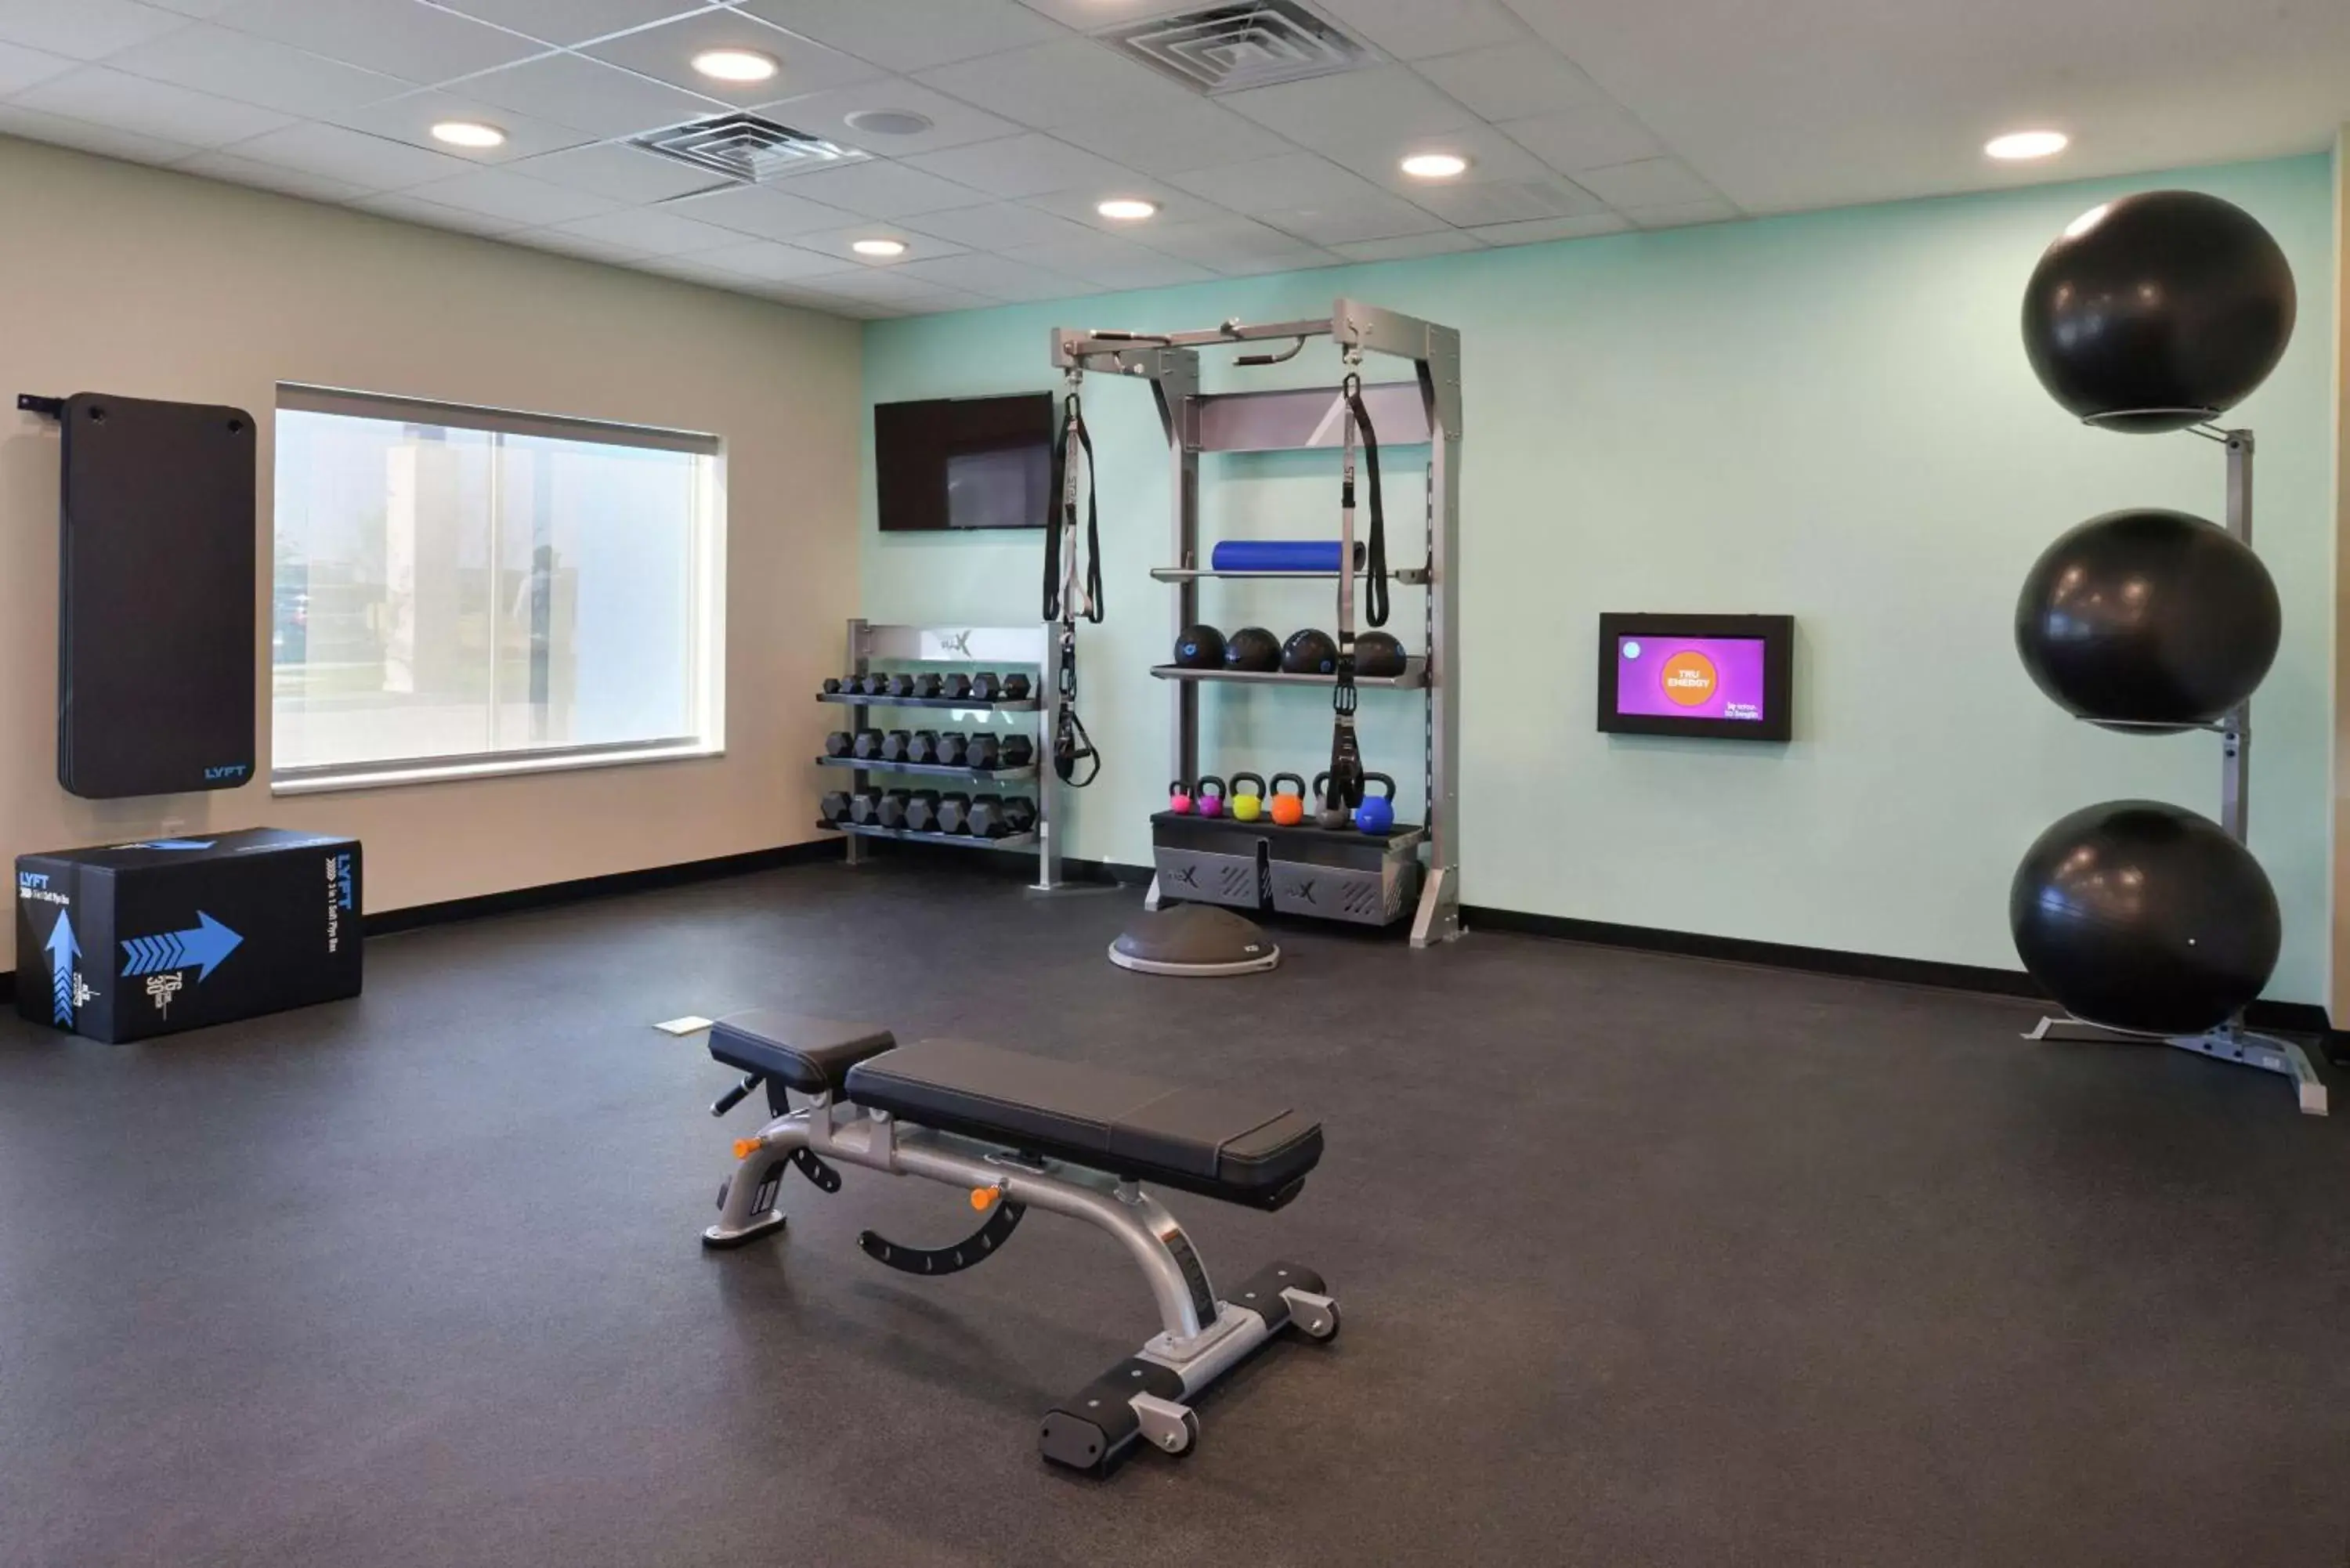 Fitness centre/facilities, Fitness Center/Facilities in Tru By Hilton Coppell DFW Airport North